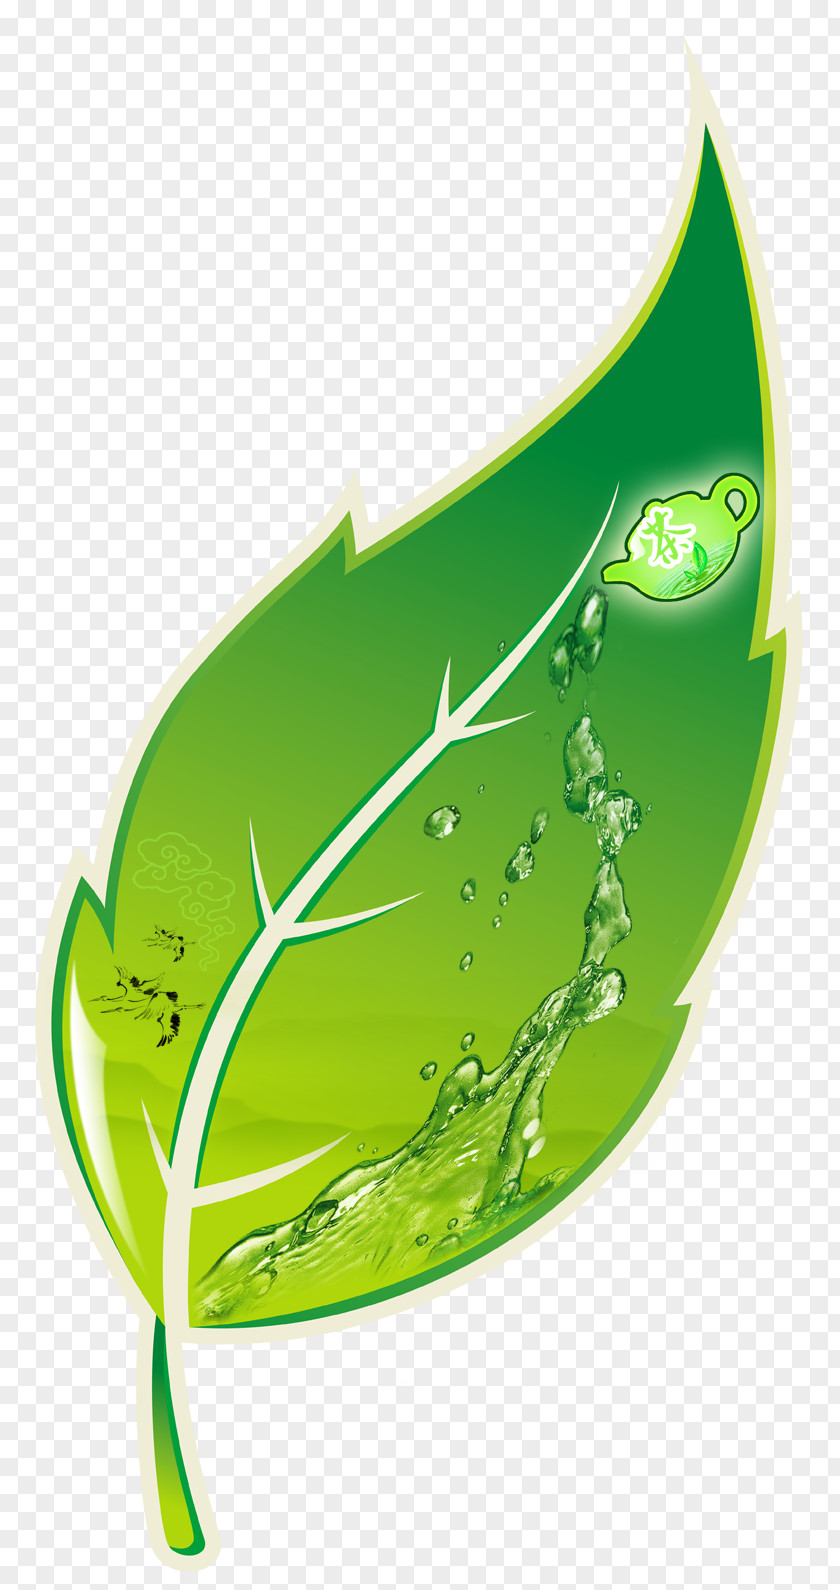 Green Tea Icon Vector Material Anxi County Graphic Design PNG